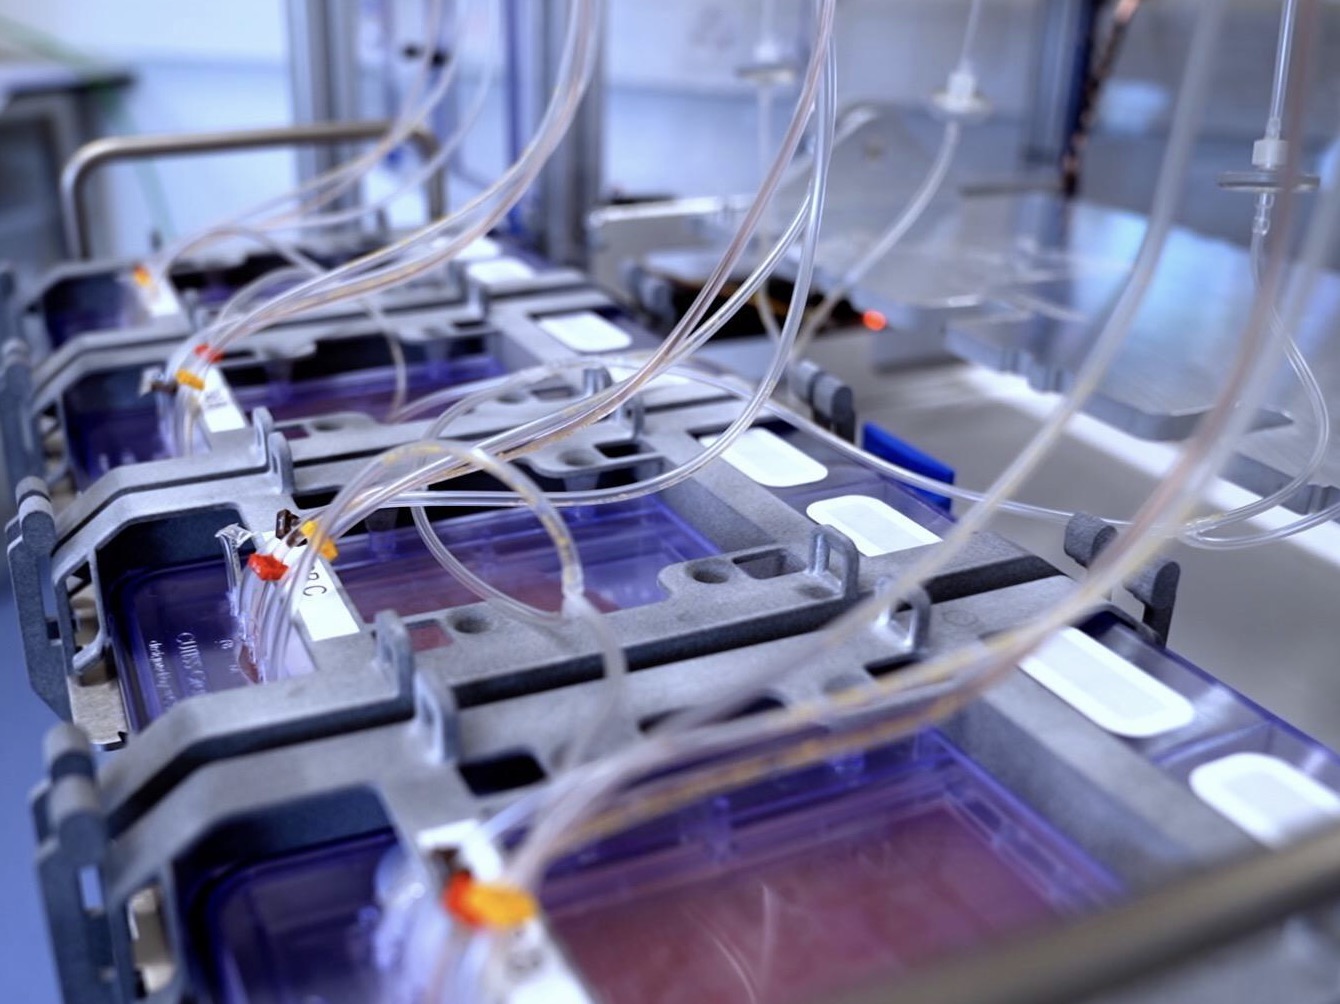 “Automated manufacturing of cell products in closed systems is a must for all regenerative therapies trying to enter the market today because it reduces dramatically the risk of microbial contamination while ensuring standardised quality and lower production costs. Knowing that our work may impact the lives of millions of patients is a unique source of motivation for the whole team.”